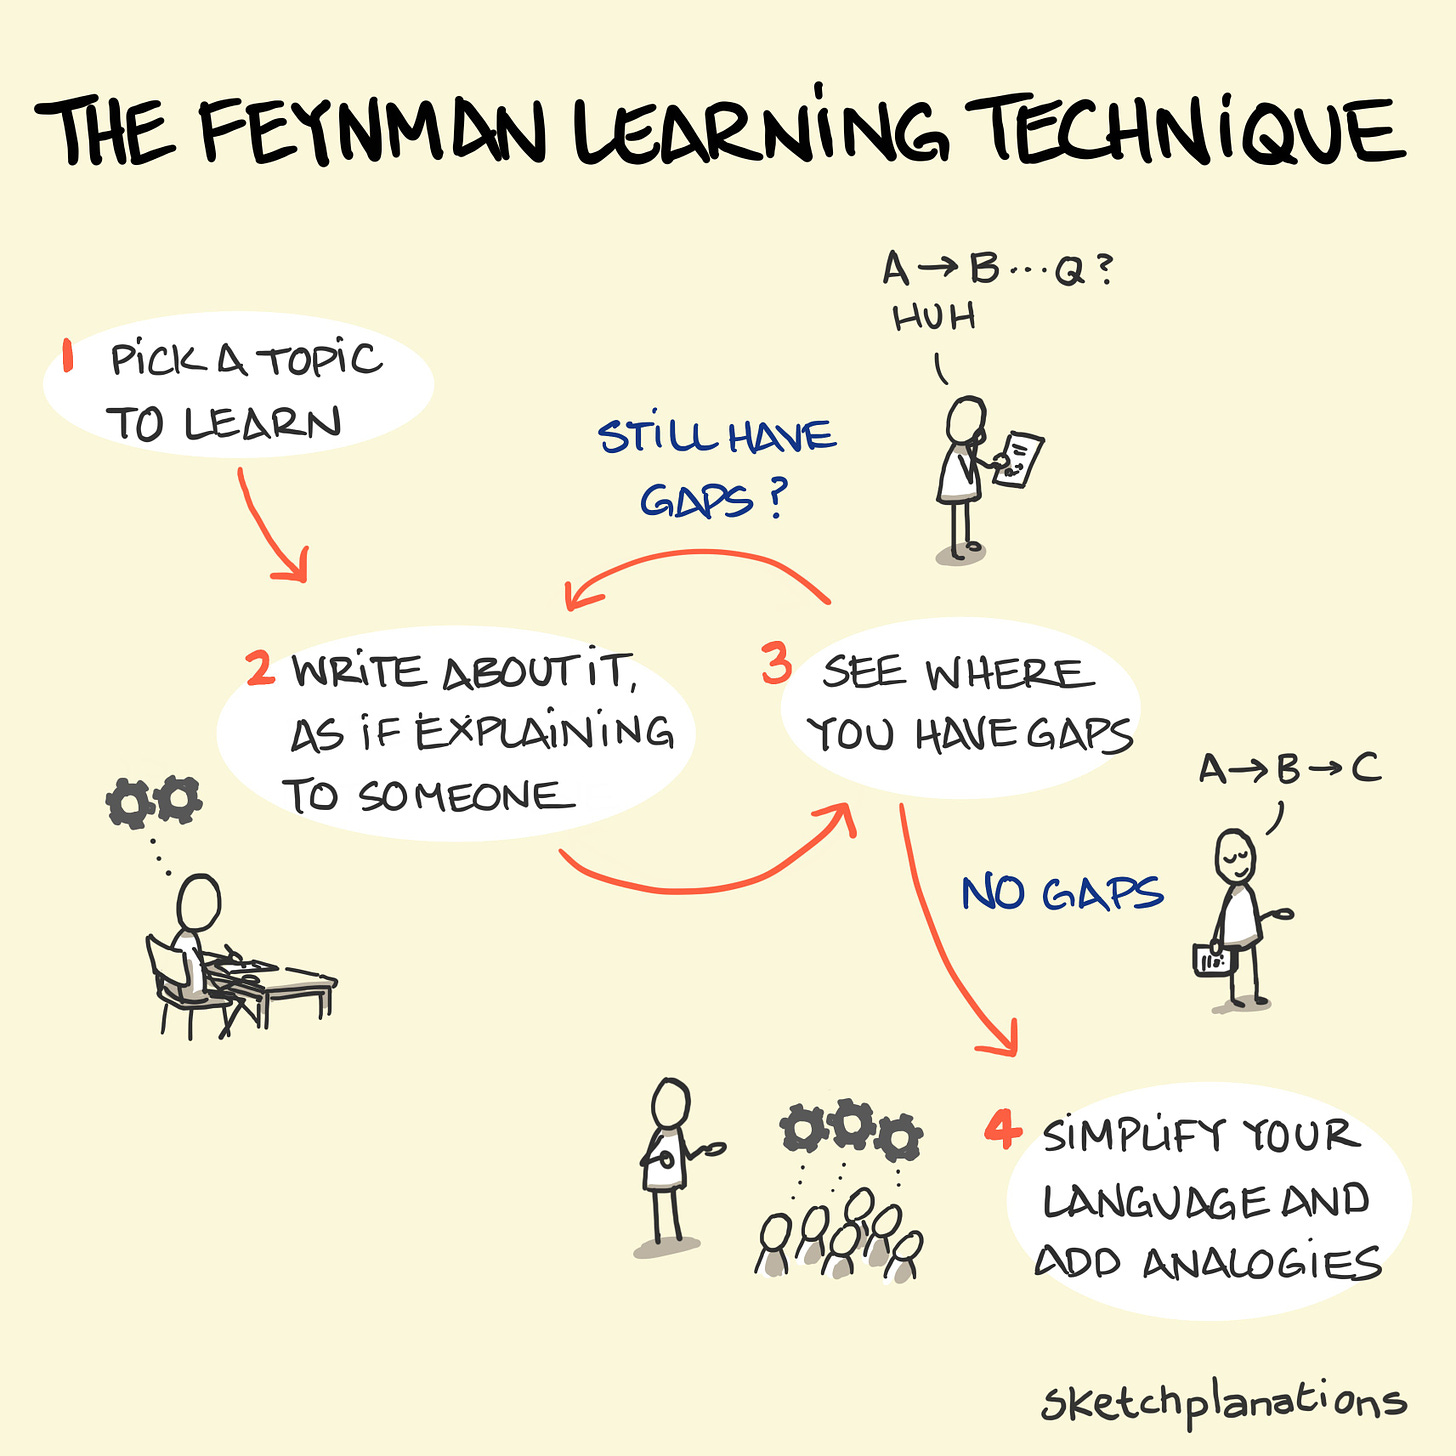 The Feynman Learning Technique illustration: a flow diagram of picking a topic, writing about it to explain to someone until it's clear and then simplifying and adding analogies